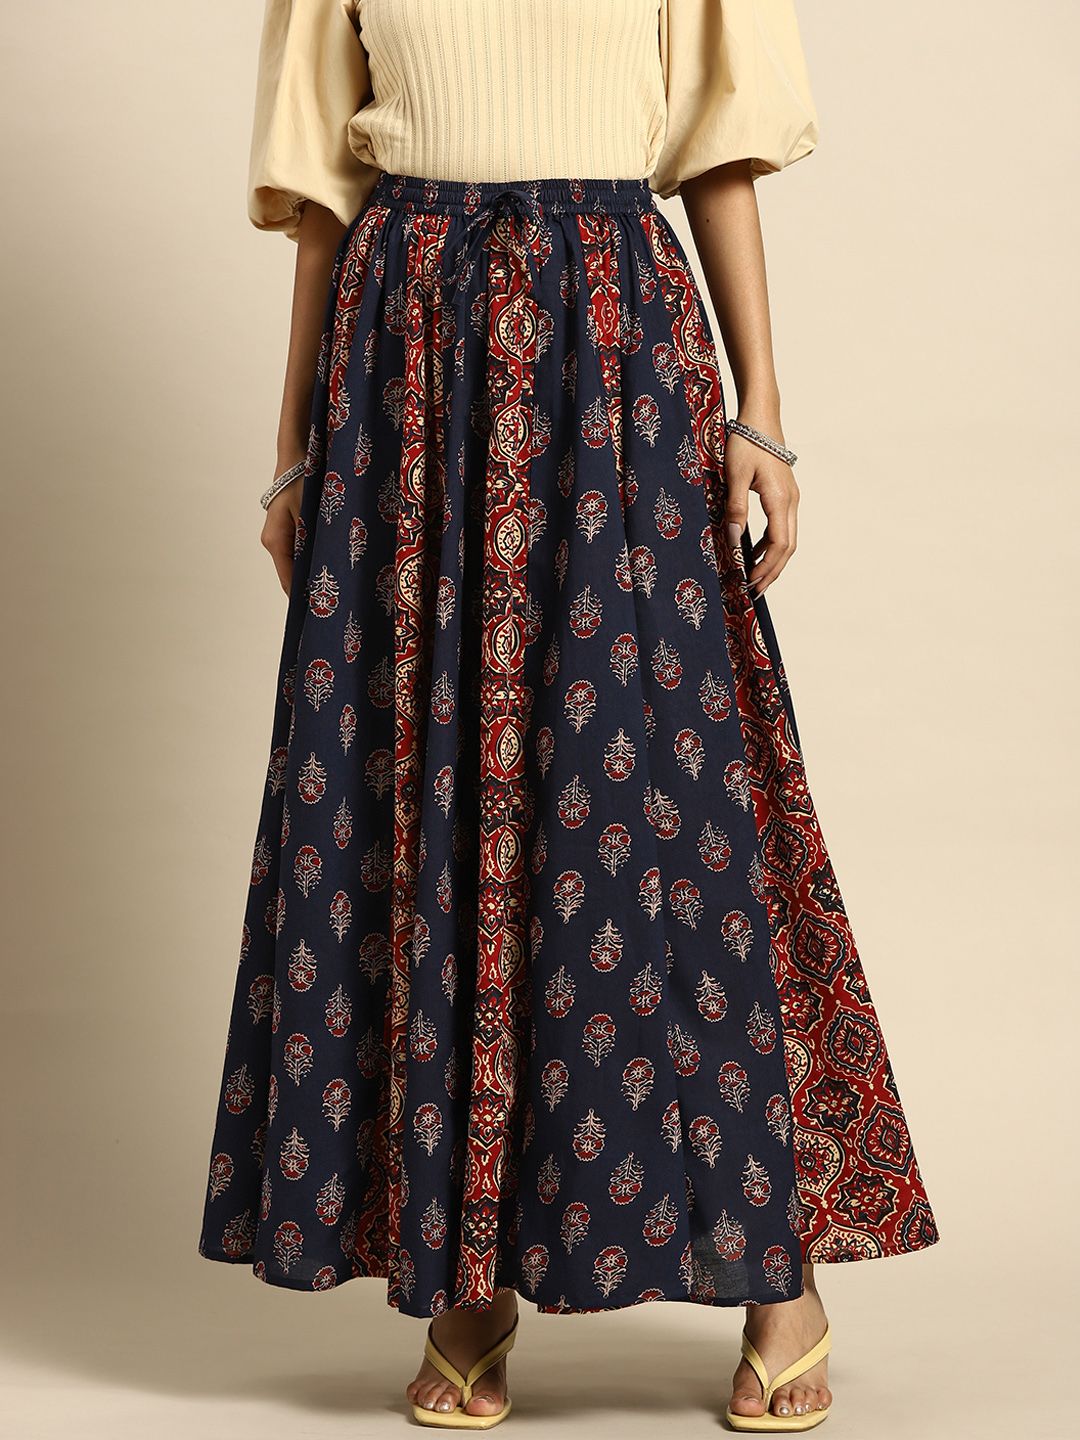 anayna Women Navy Blue & Maroon Printed Flared Cotton Maxi Skirt Price in India